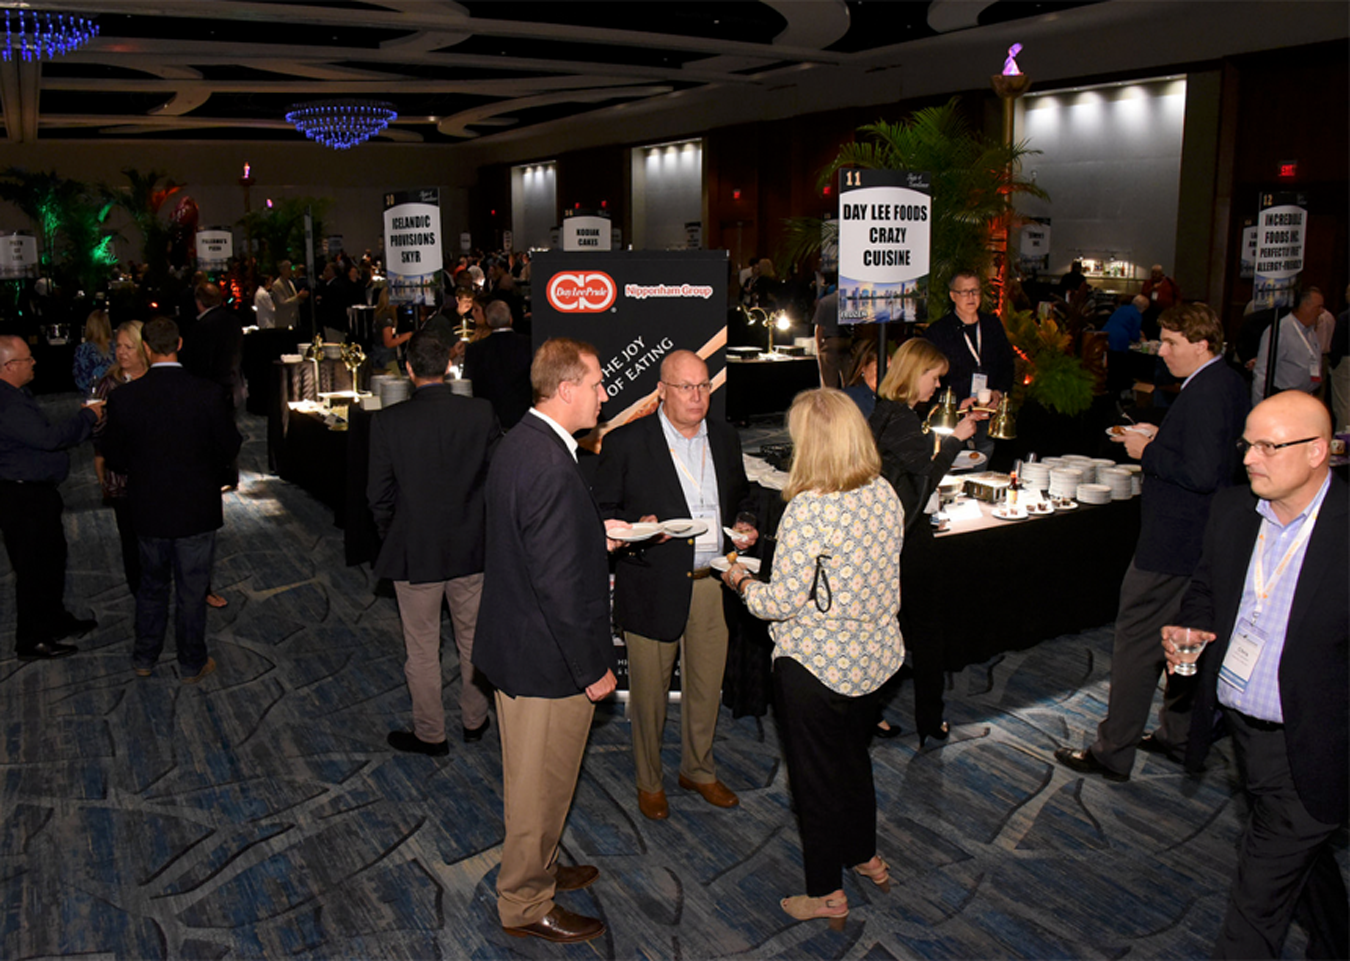 NFRA members mingle during the Taste of Excellence